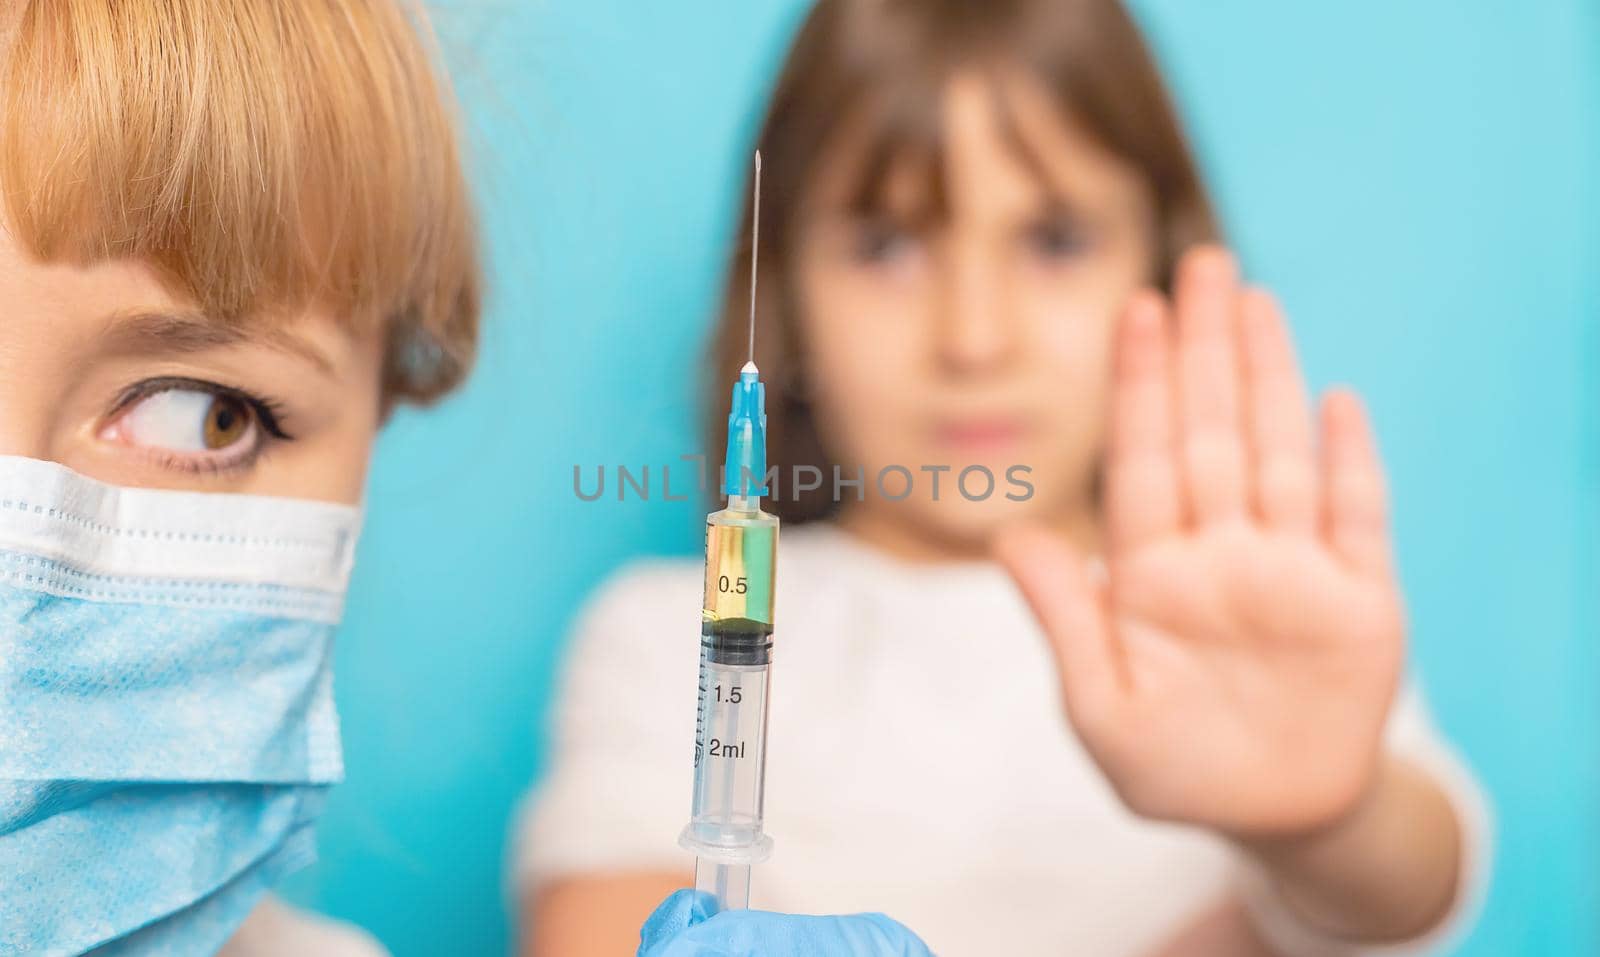 The child is injected into the arm. Selective focus.